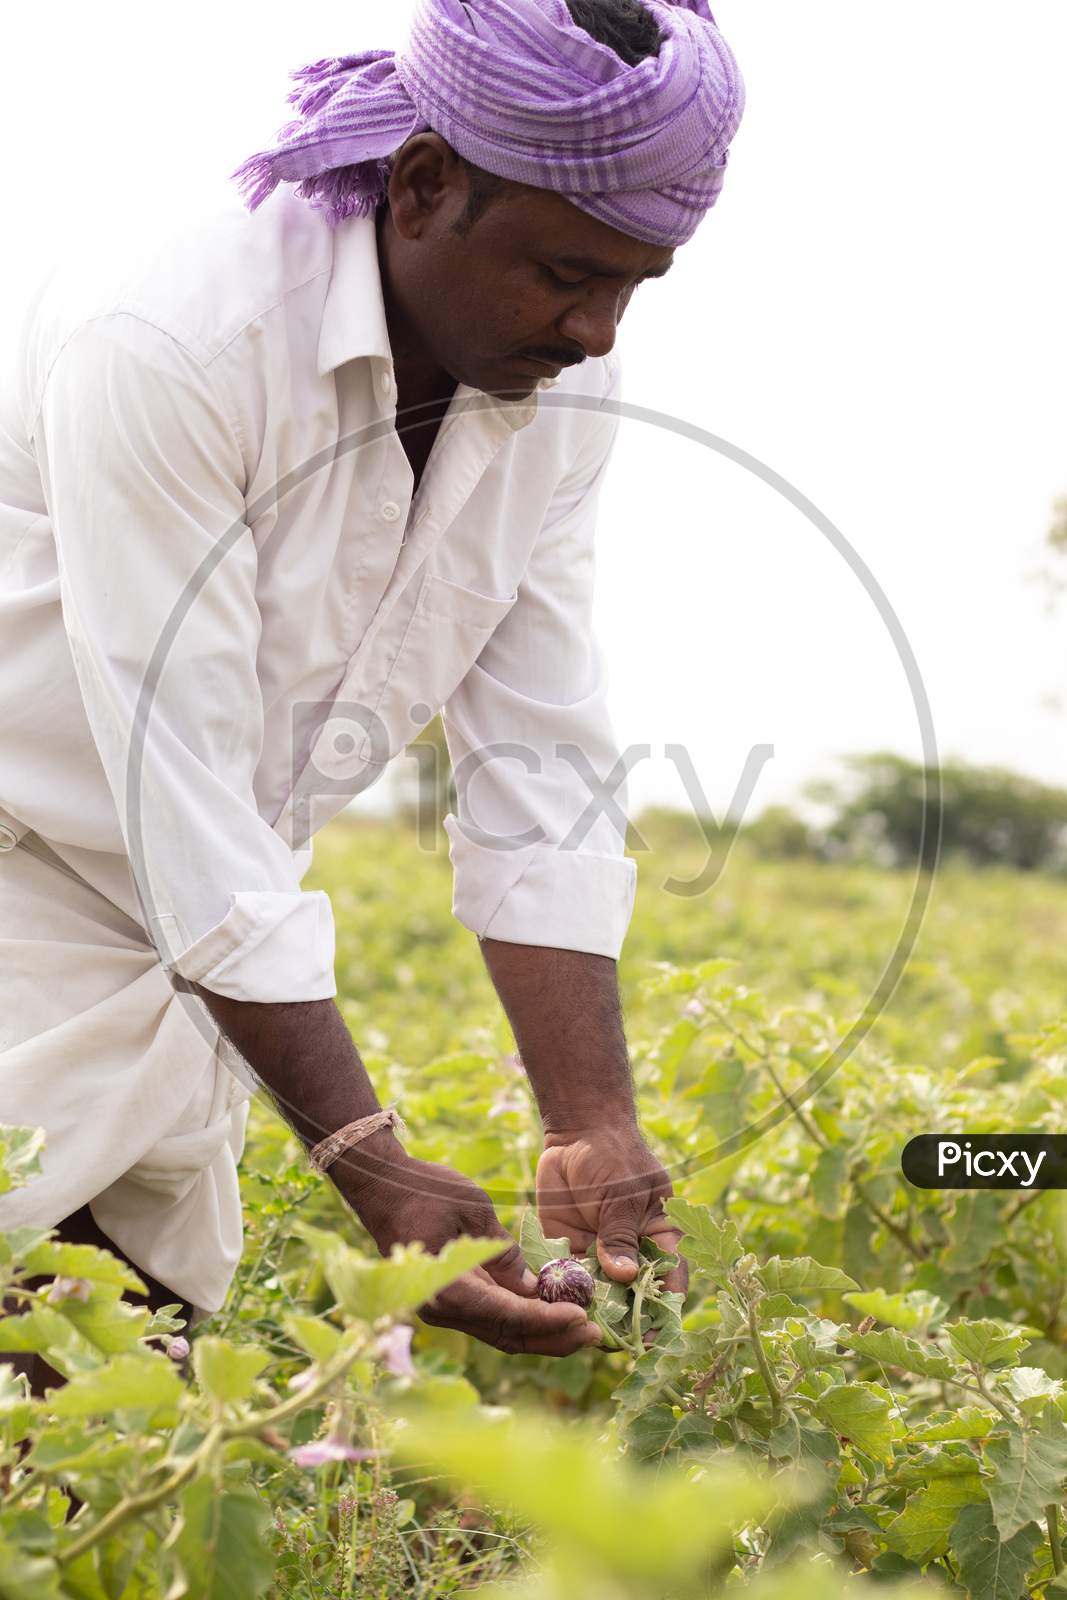 Indian Farmer Working In Agriculture Field